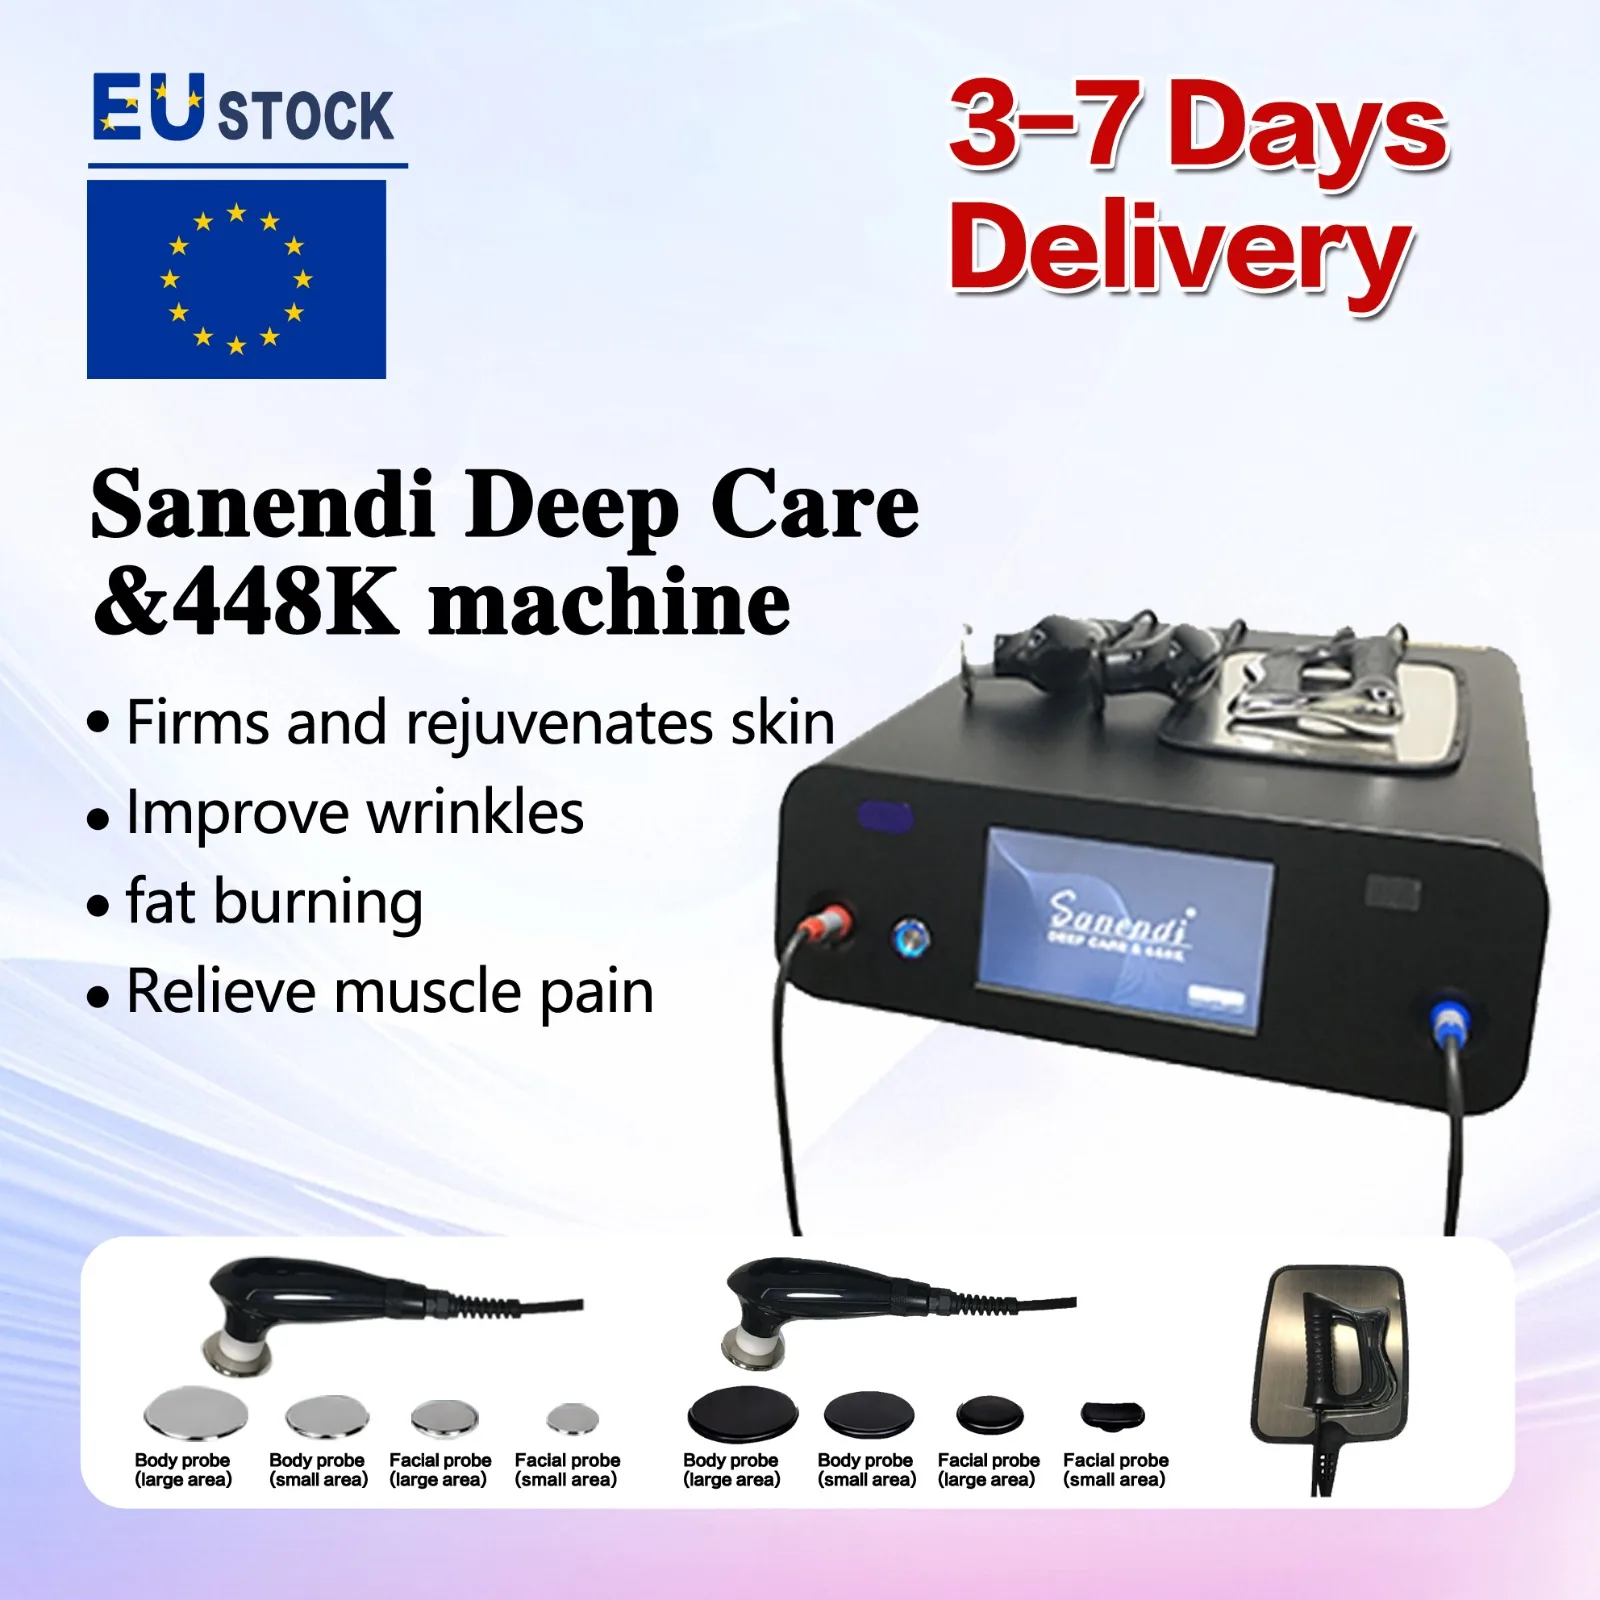 NEW 448K Indiba Body Fat Removal Slimming RF CAP RES System Facial y Corporal Radiofrecuencia Tecar Therapy Machine intelligent air purifier in addition to aldehyde removal household and commercial fresh air system full heat exchange